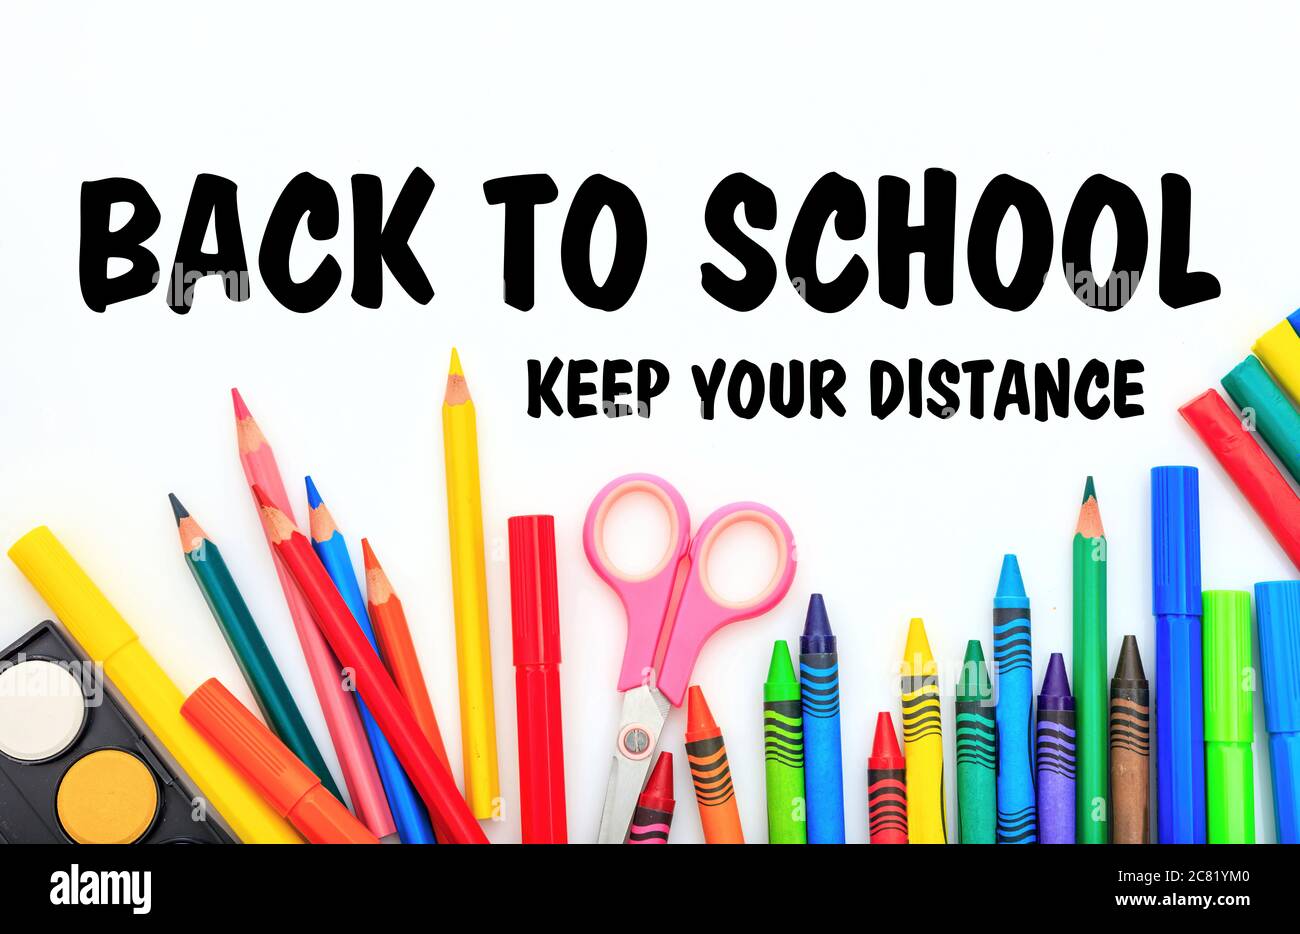 BACK TO SCHOOL KEEP YOUR DISTANCE text message and school supplies on white background, Coronavirus spread in school prevention measure Stock Photo